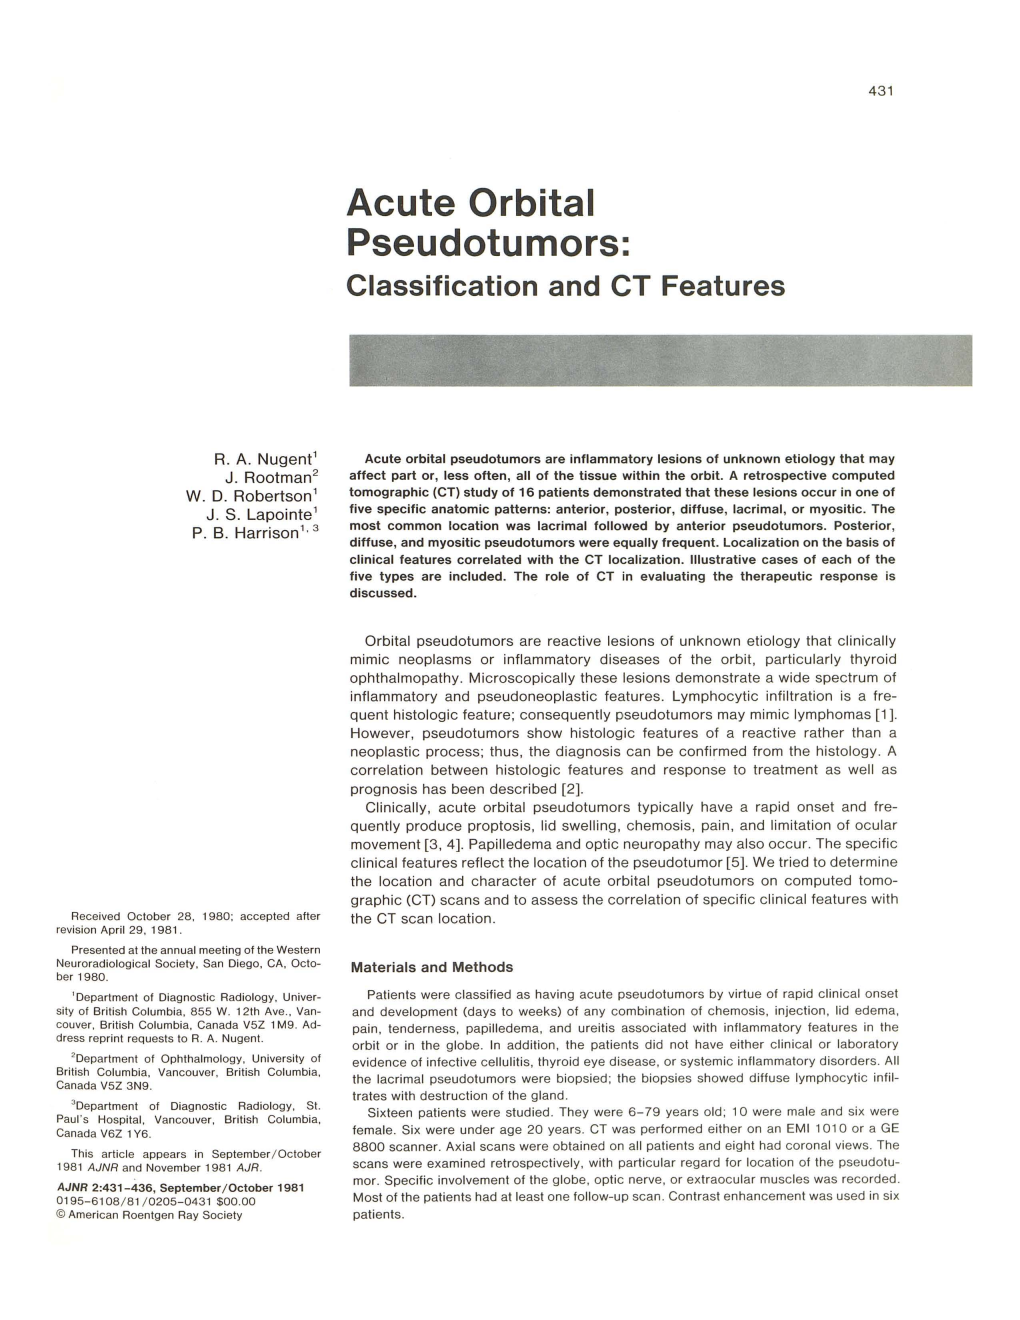 Acute Orbital Pseudotumors: Classification and CT Features